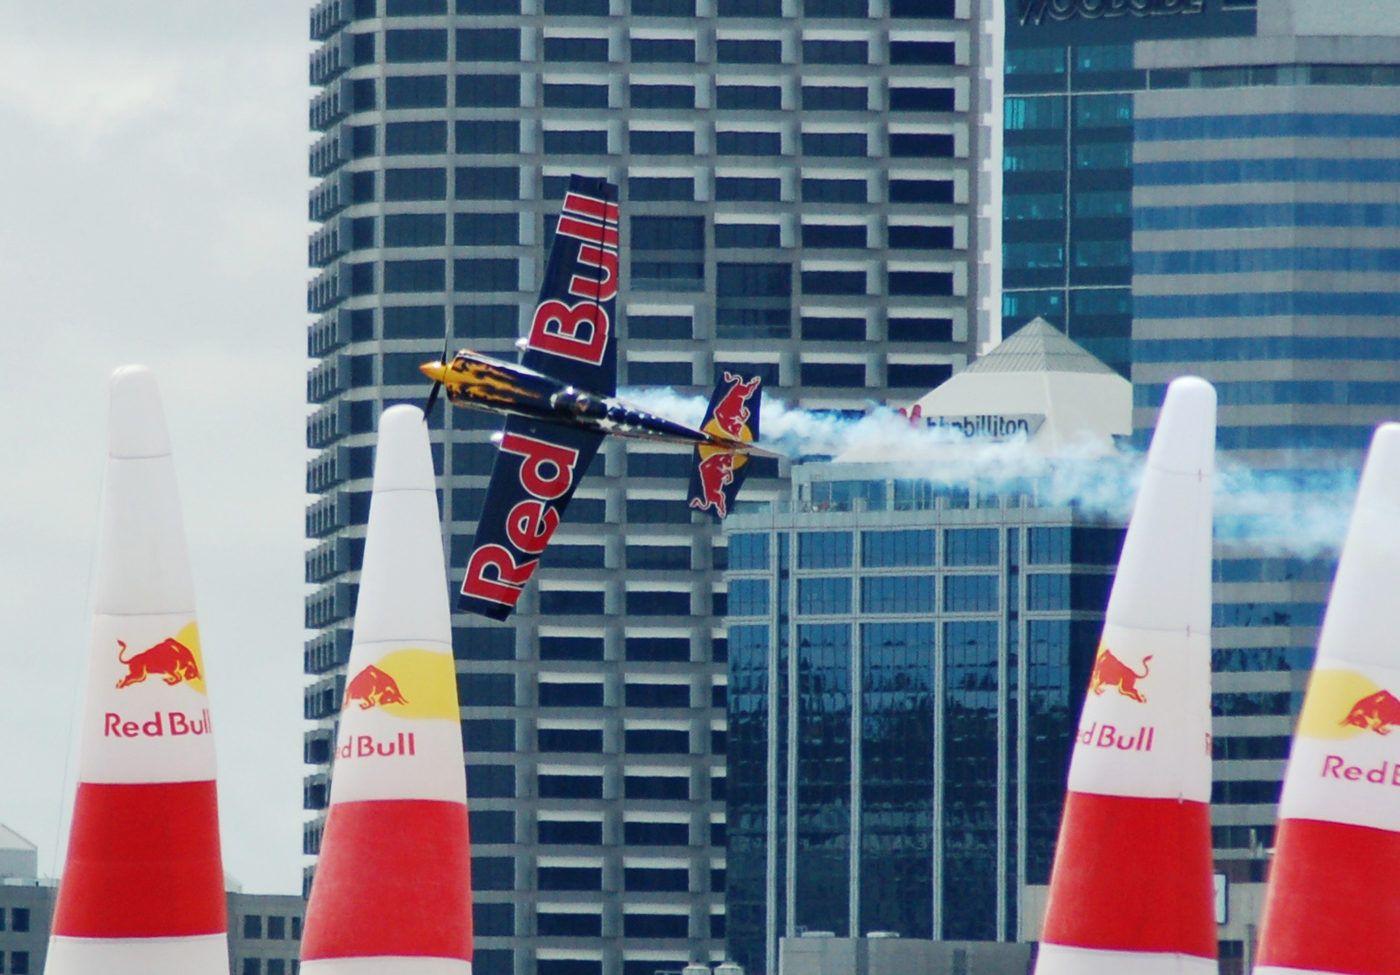 Photo of Kirby Chambliss, performing a "knife edge" maneuver in his Edge 540 in Perth, Western Australia during the final leg of the 2006 series. Credit: Myself (Hamish) [CC BY 2.0 (https://creativecommons.org/licenses/by/2.0)], via Wikimedia Commons.